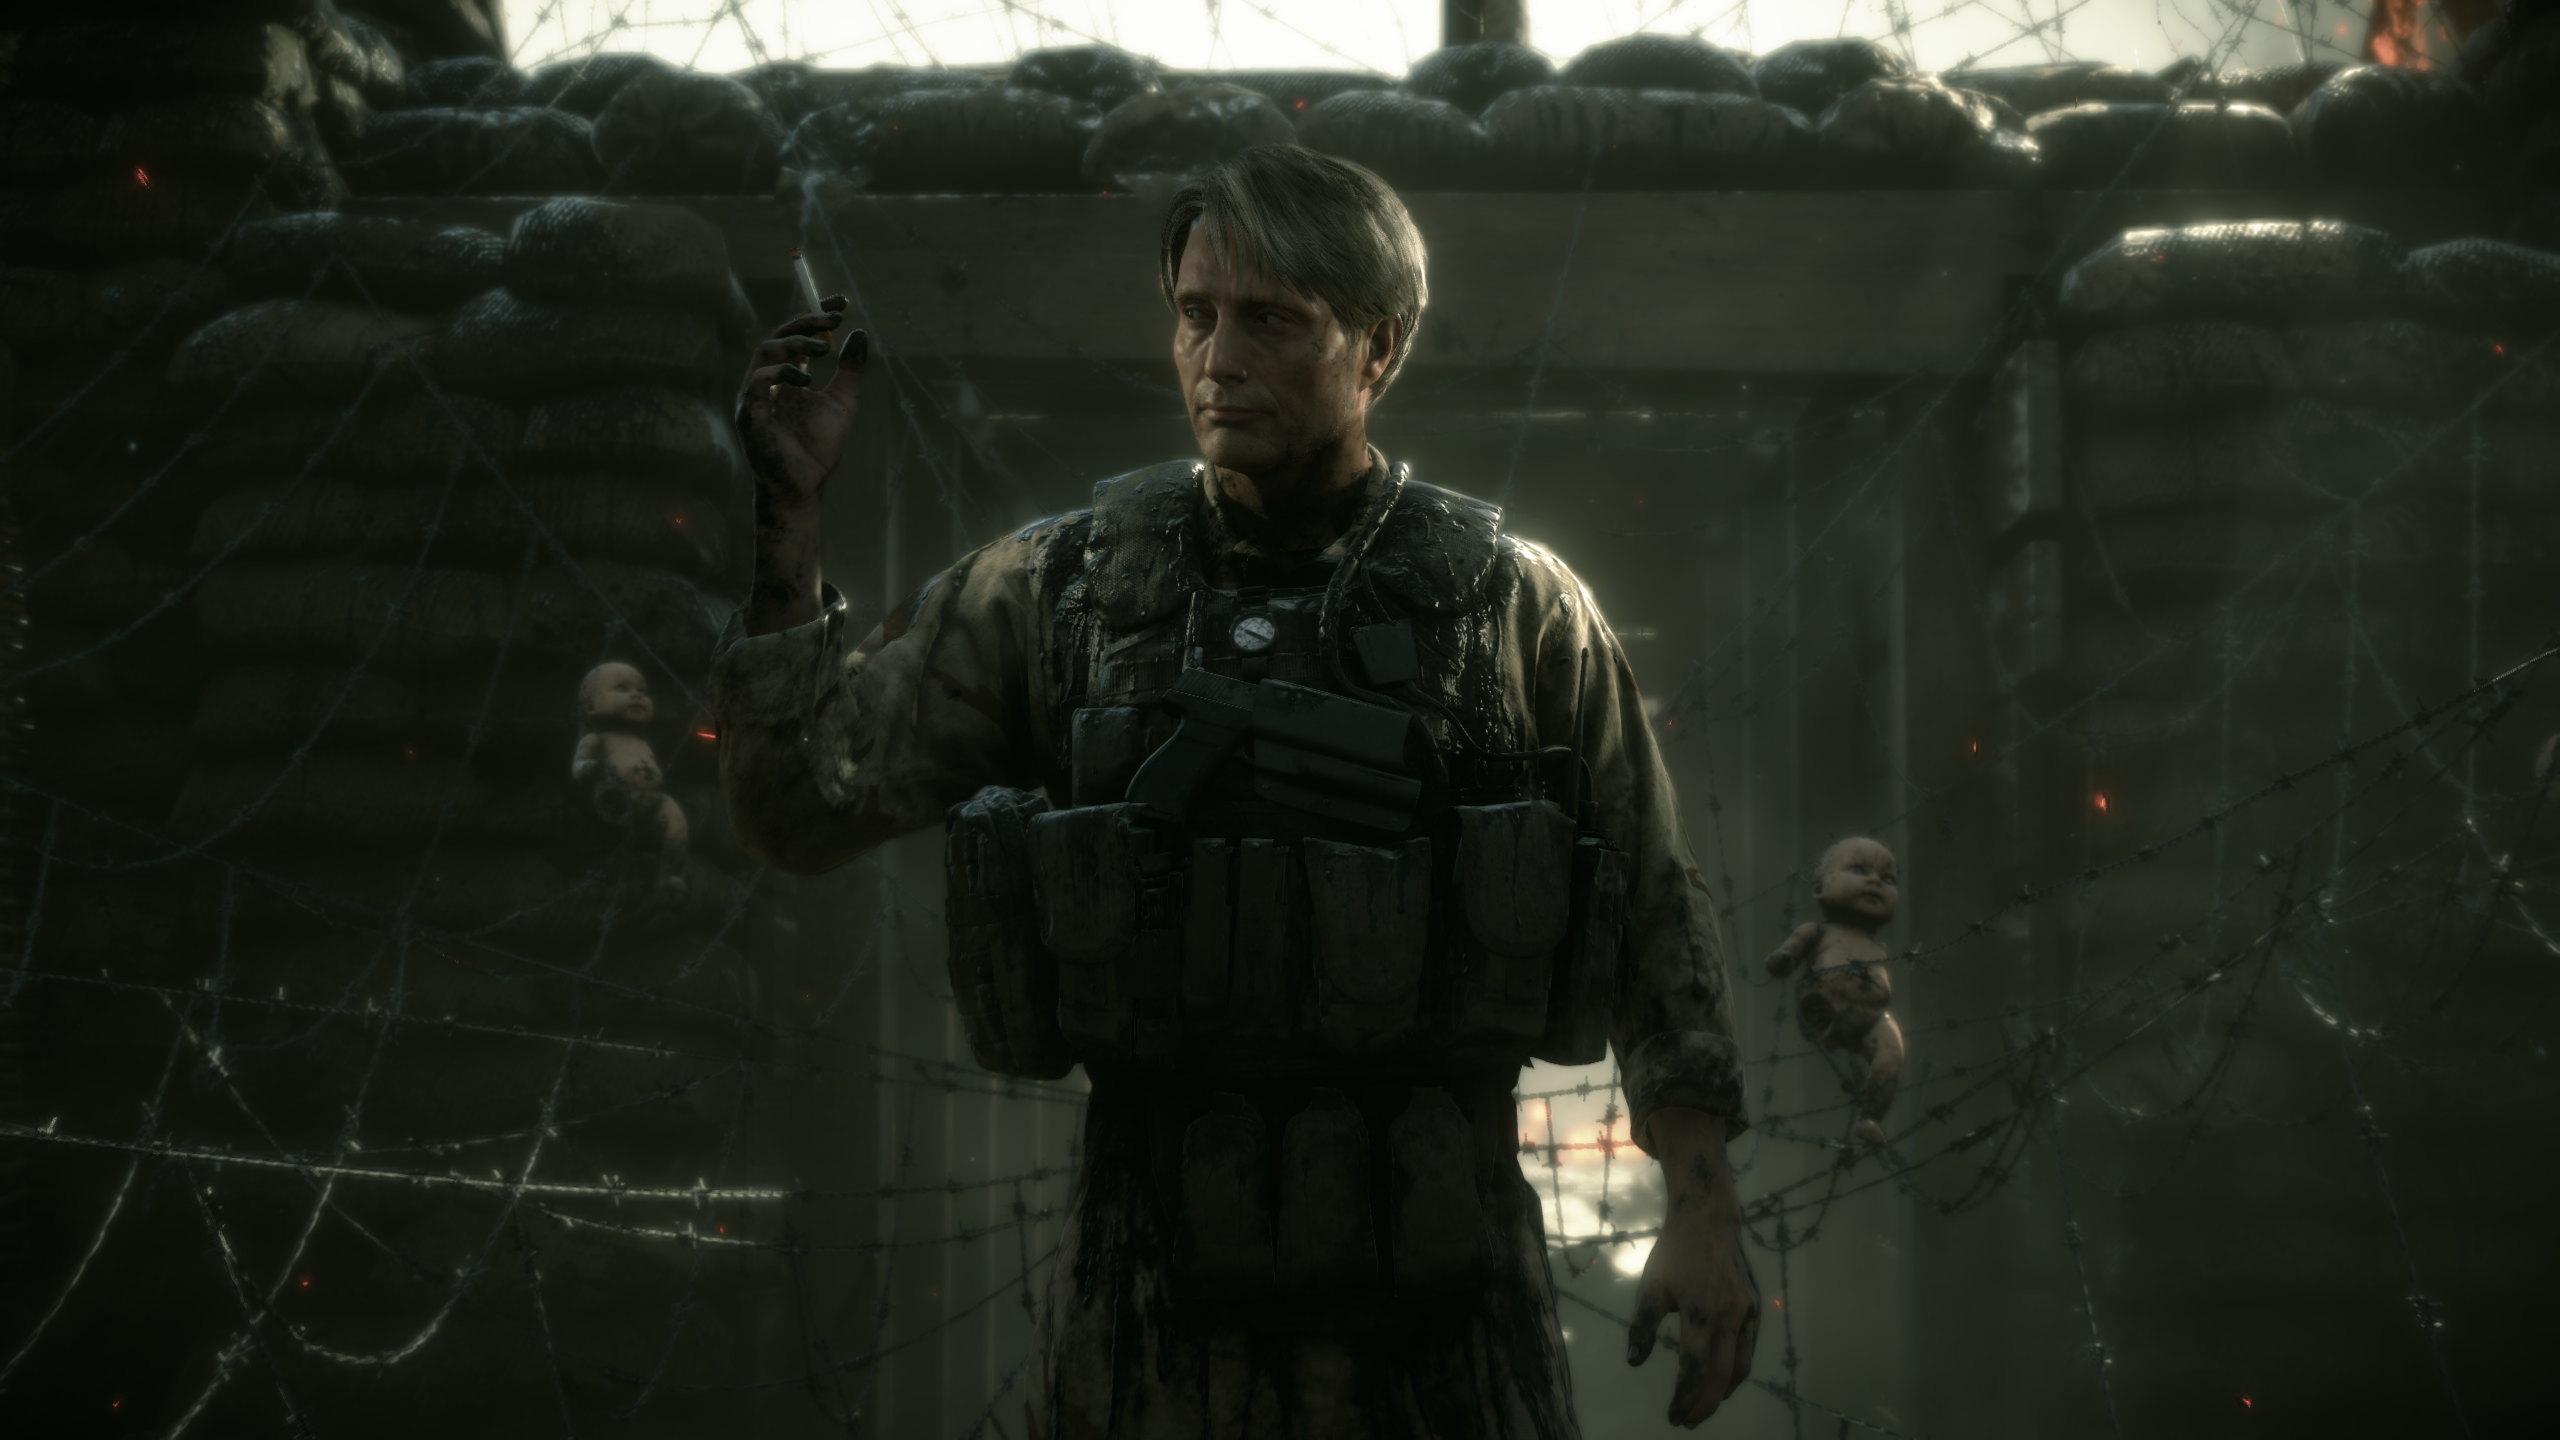 Death Stranding Mads Mikkelsen Video Games CGi Video Game Man Video Game Characters Cigarettes Unifo 2560x1440